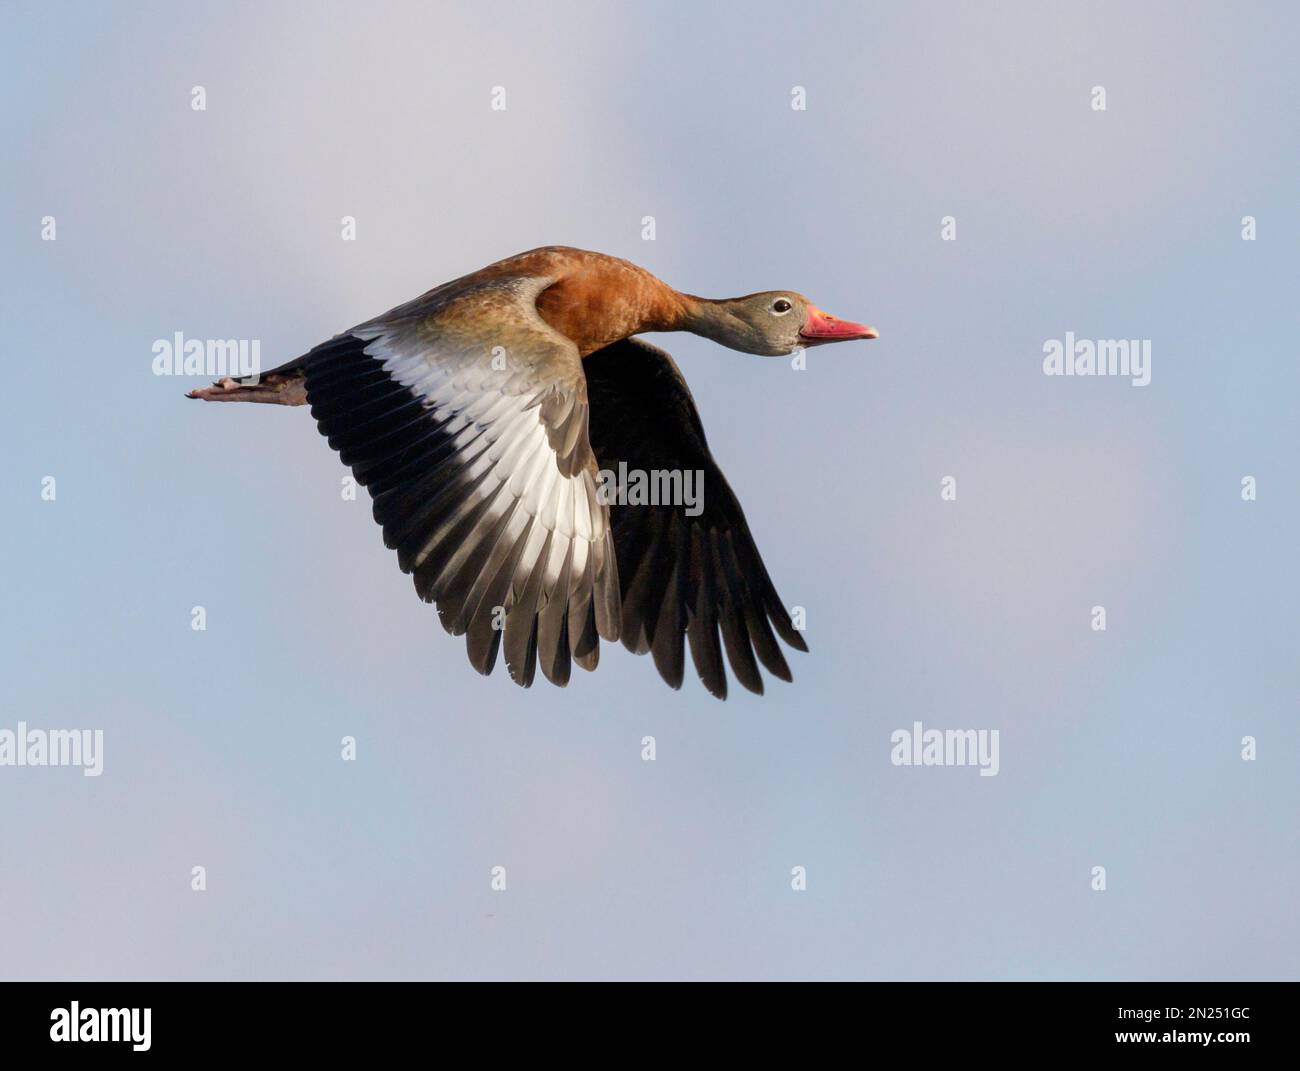 Black-bellied whistling duck (Dendrocygna autumnalis) flying, Brazos Bend State Park, Needville, Texas, USA Stock Photo